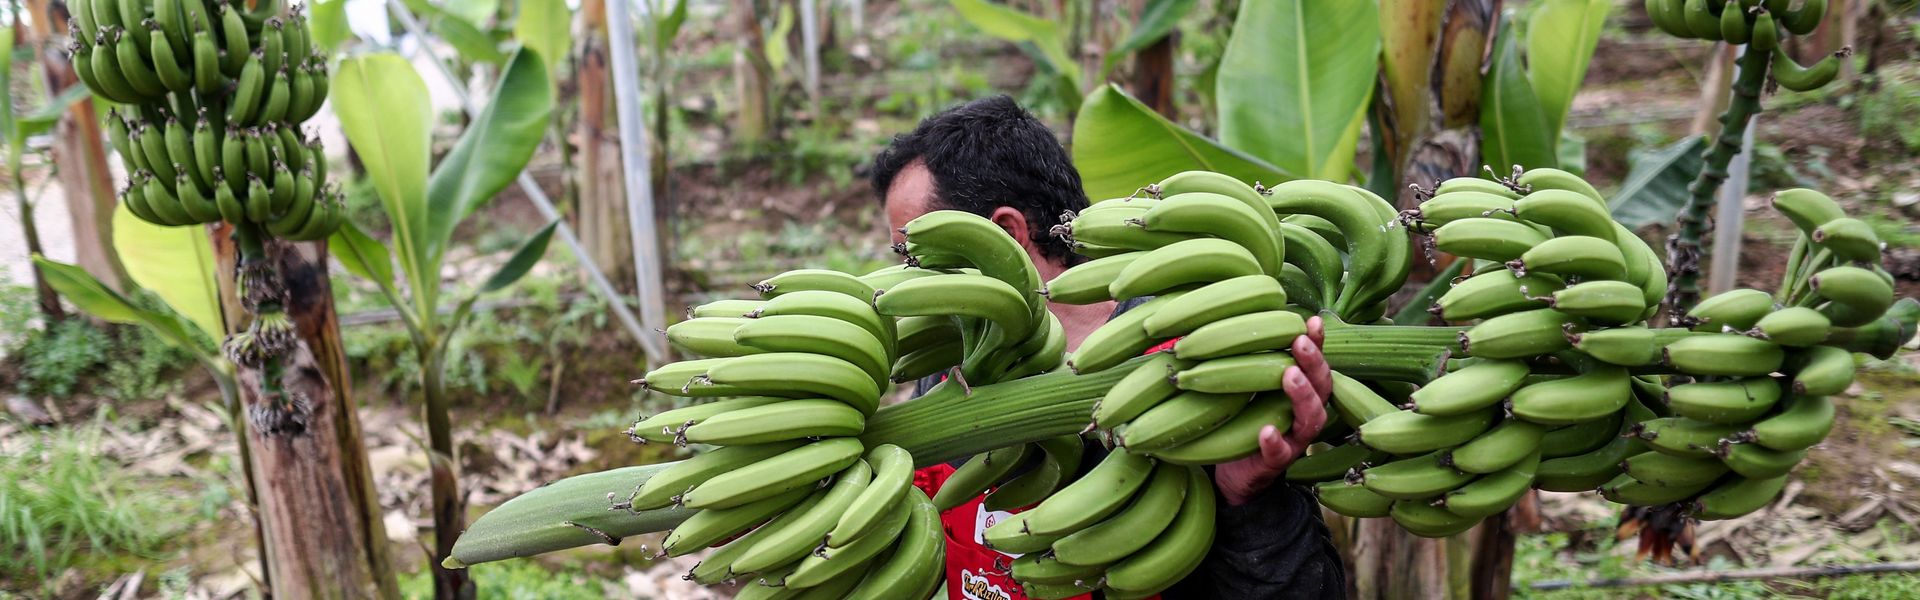 Syrian refugees attend banana harvest in Hatay